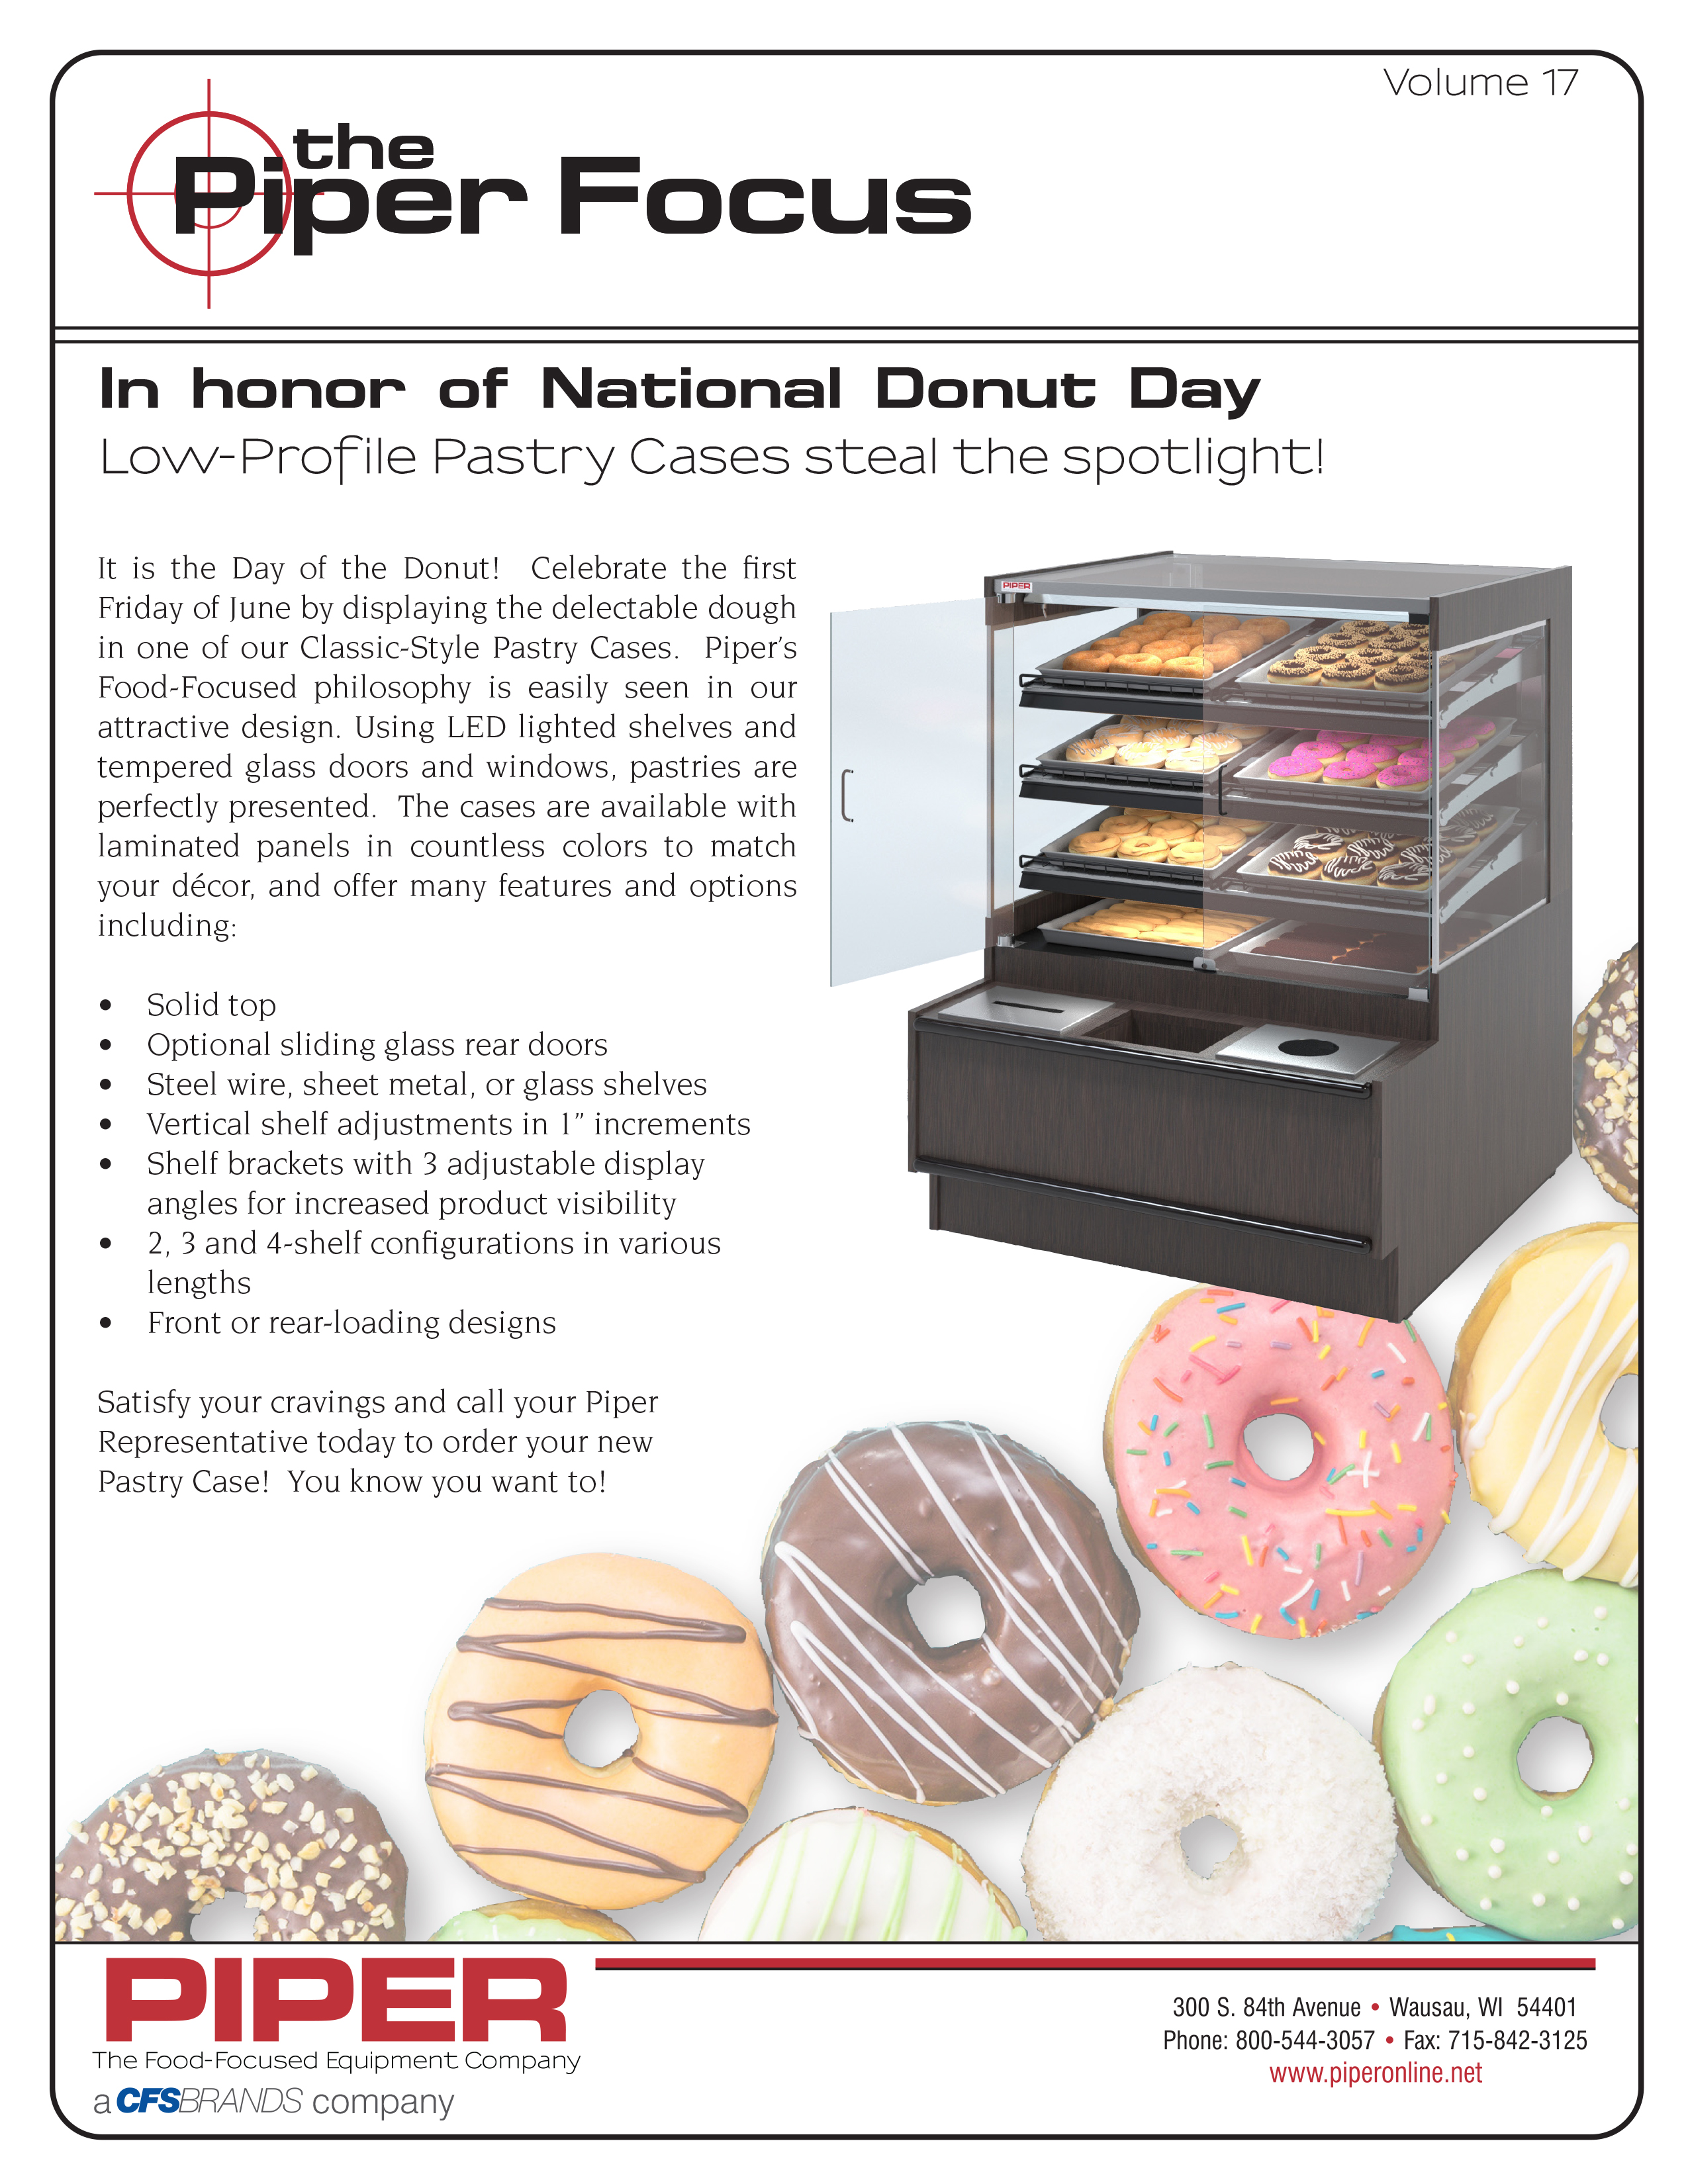 Piper Focus - National Donut Day!